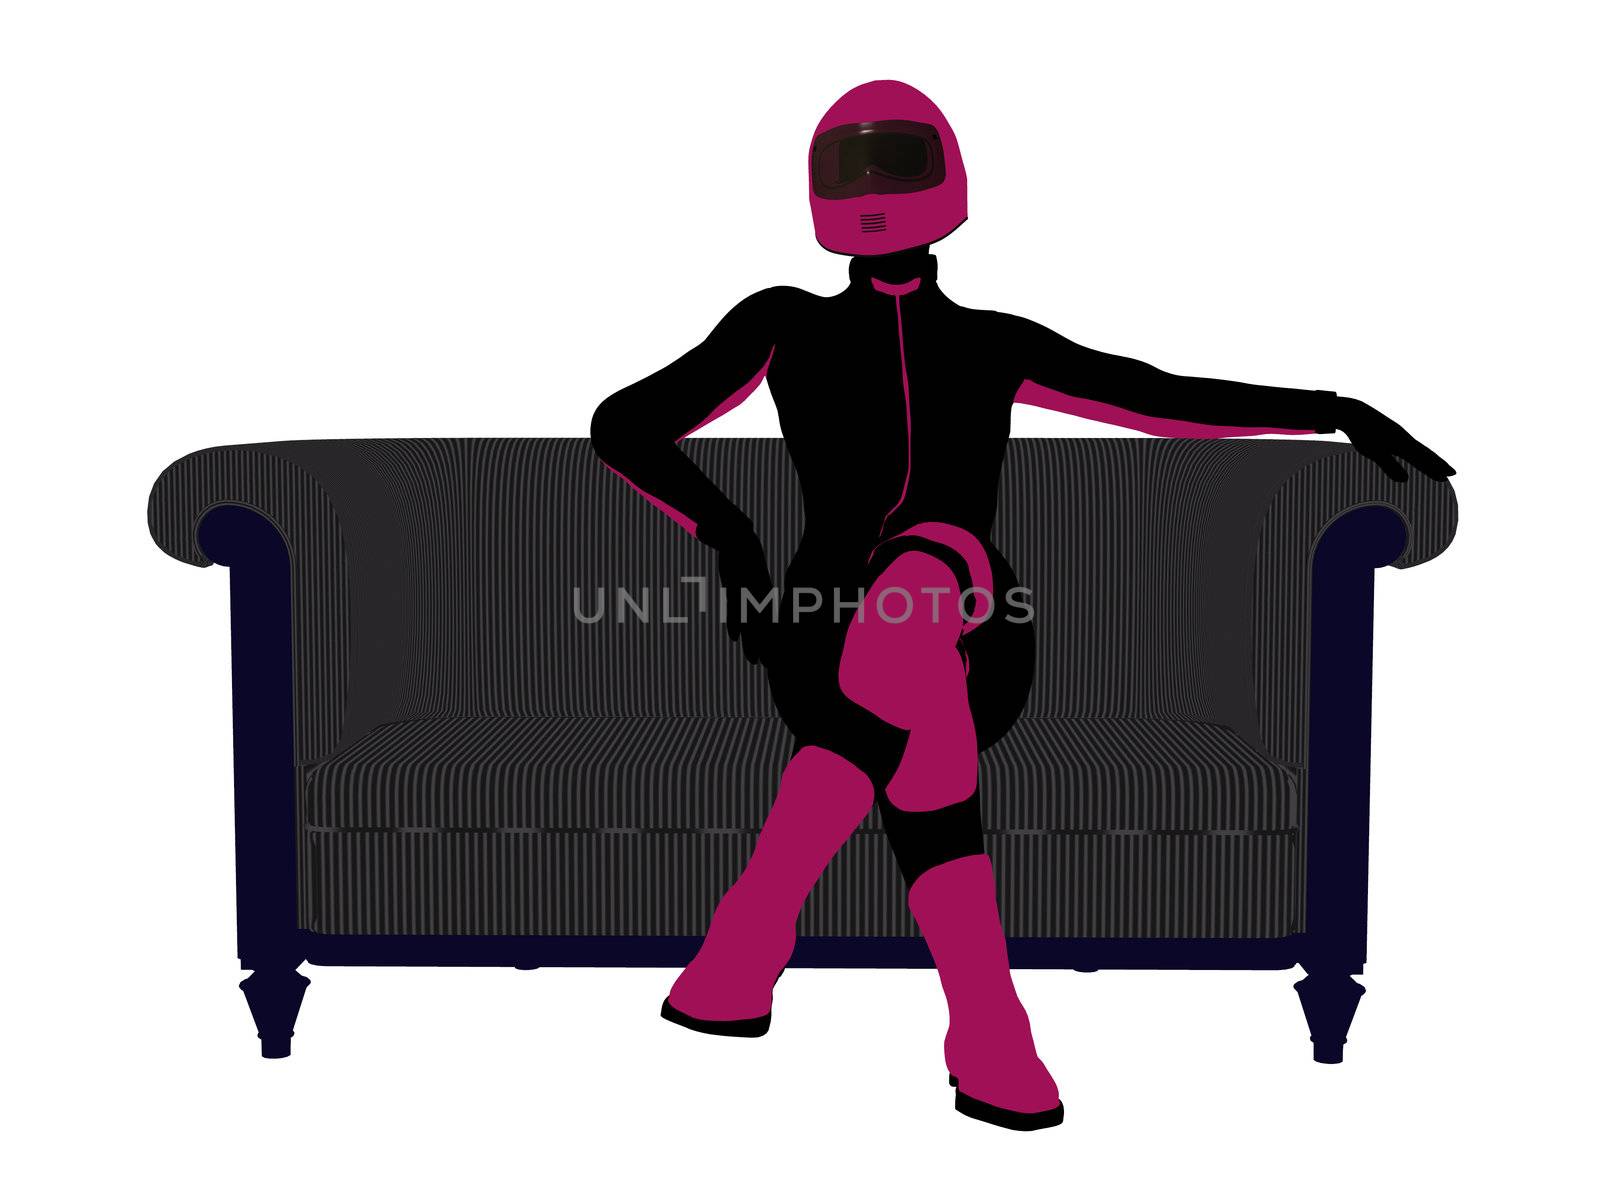 A female motorcycle rider sitting on a sofa silhouette on a white background